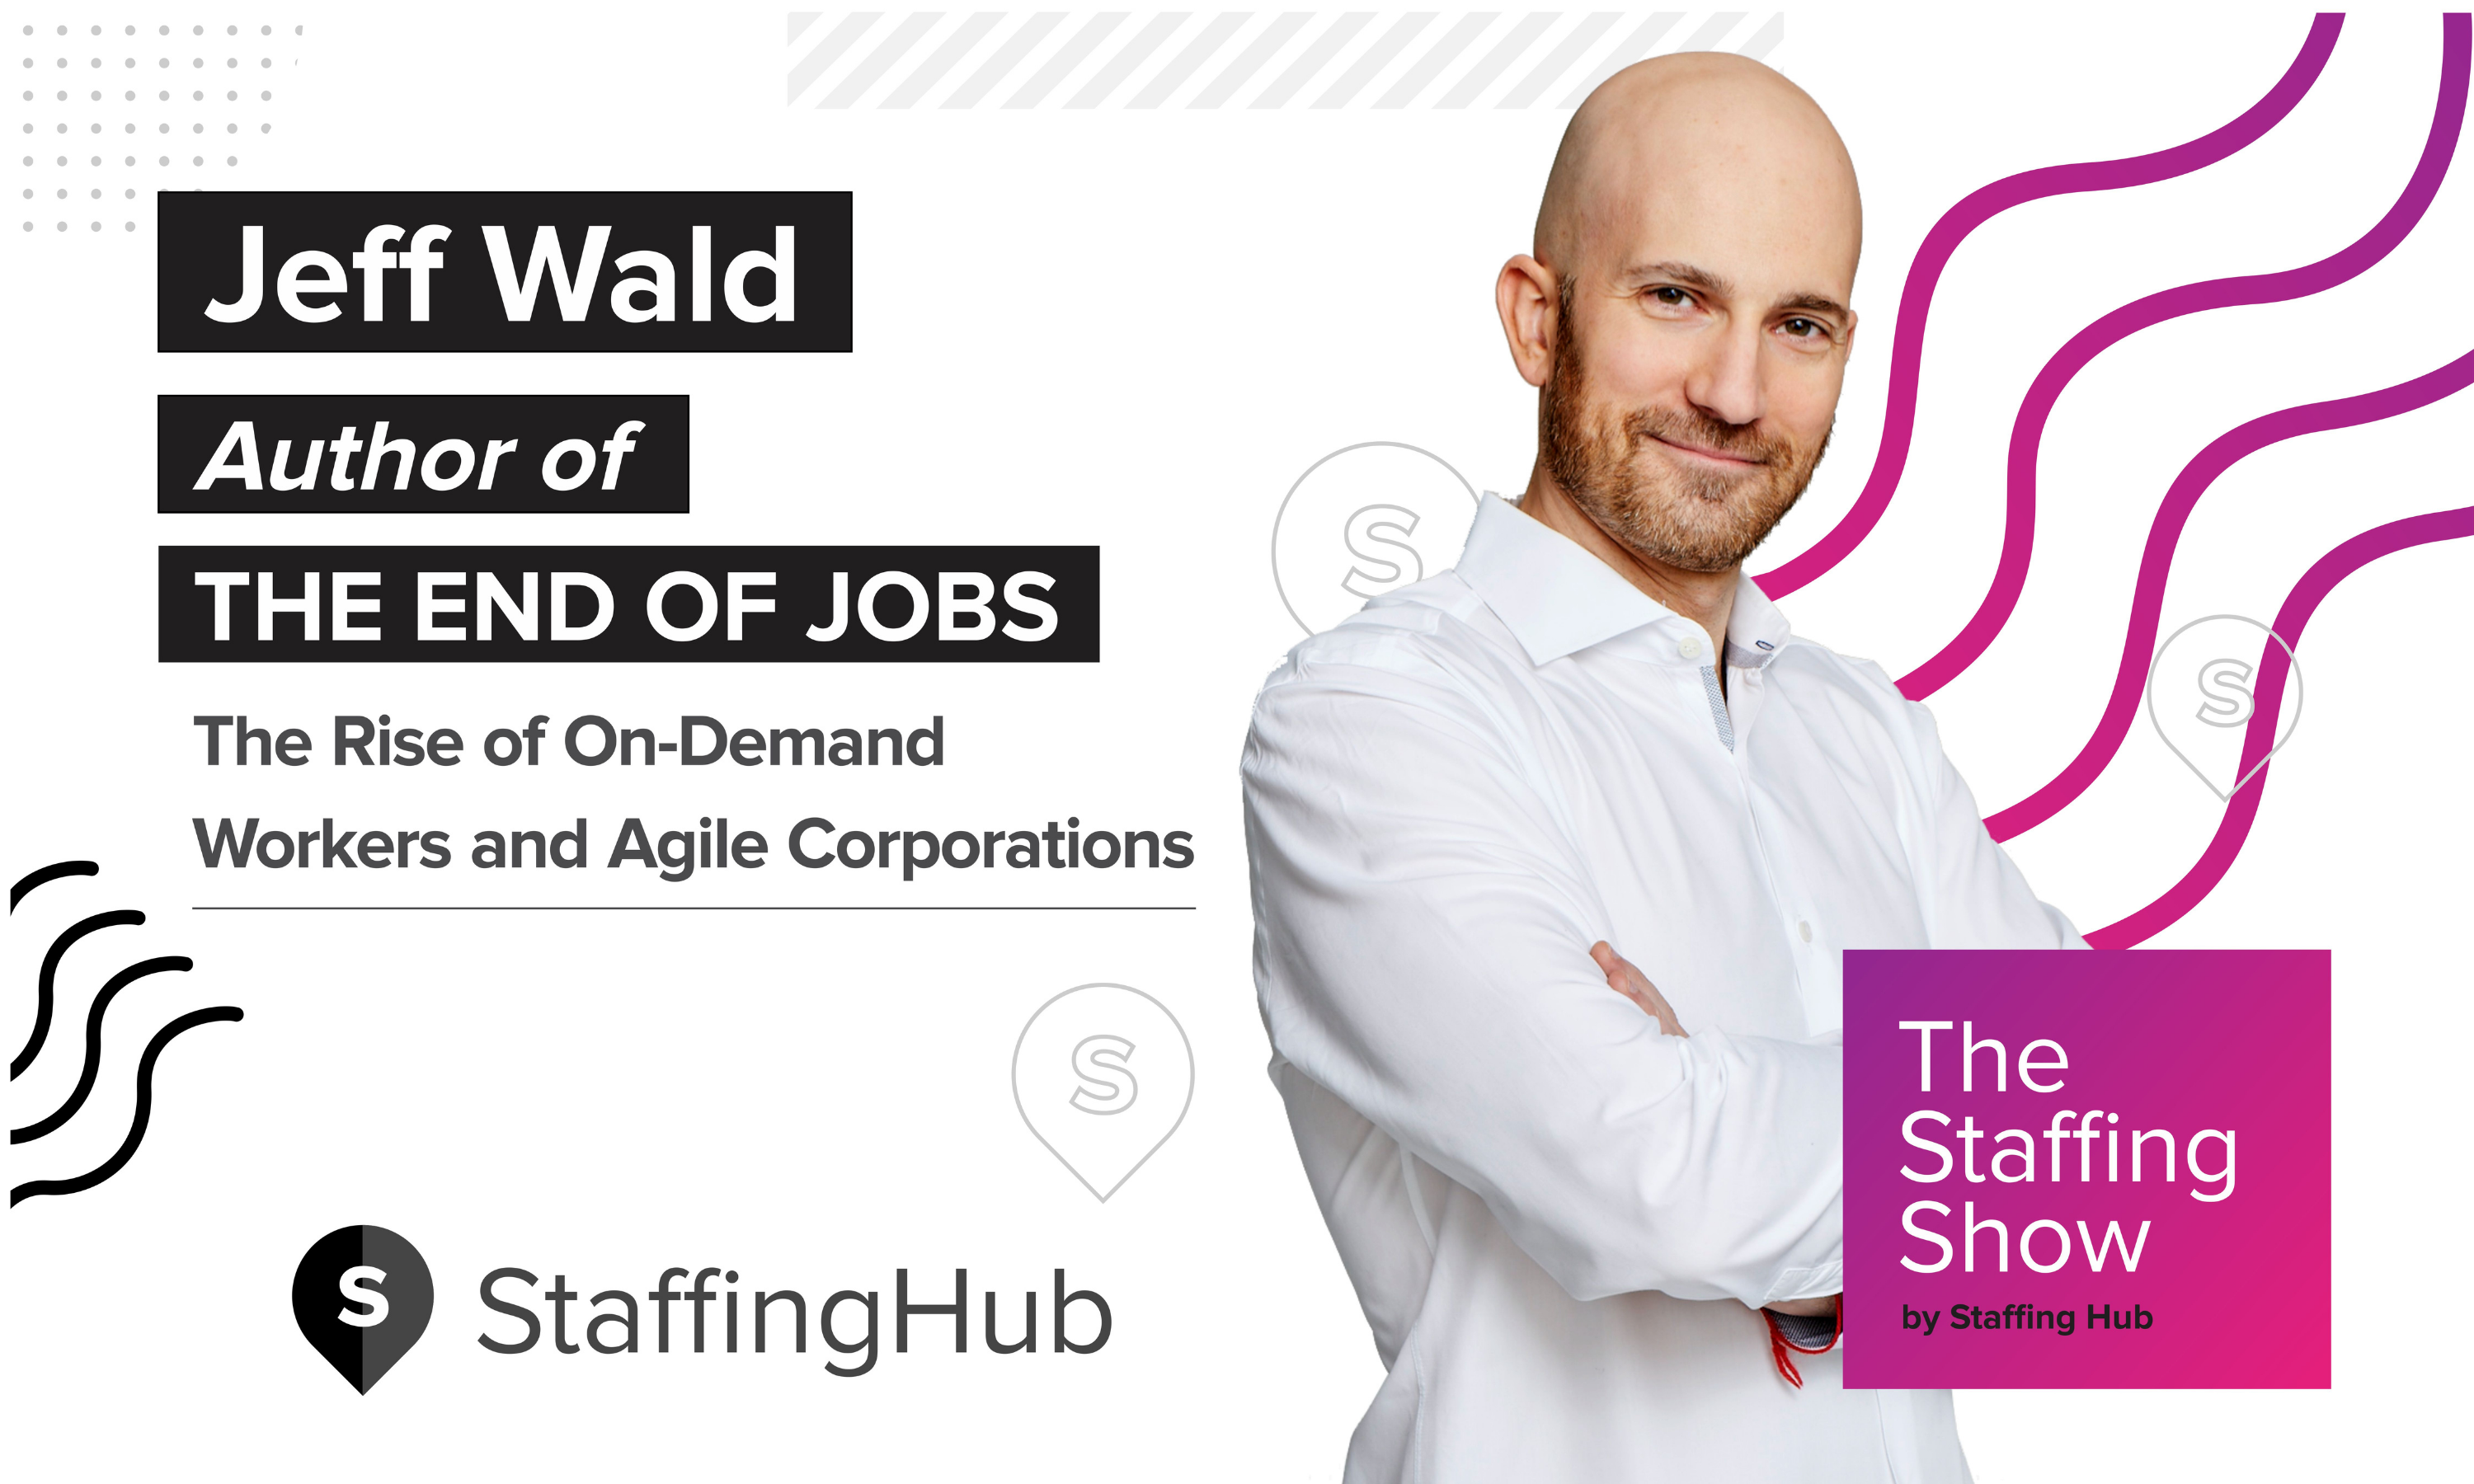 Jeff Wald, Author of The End of Jobs: The Rise of On-Demand Workers and Agile Corporations